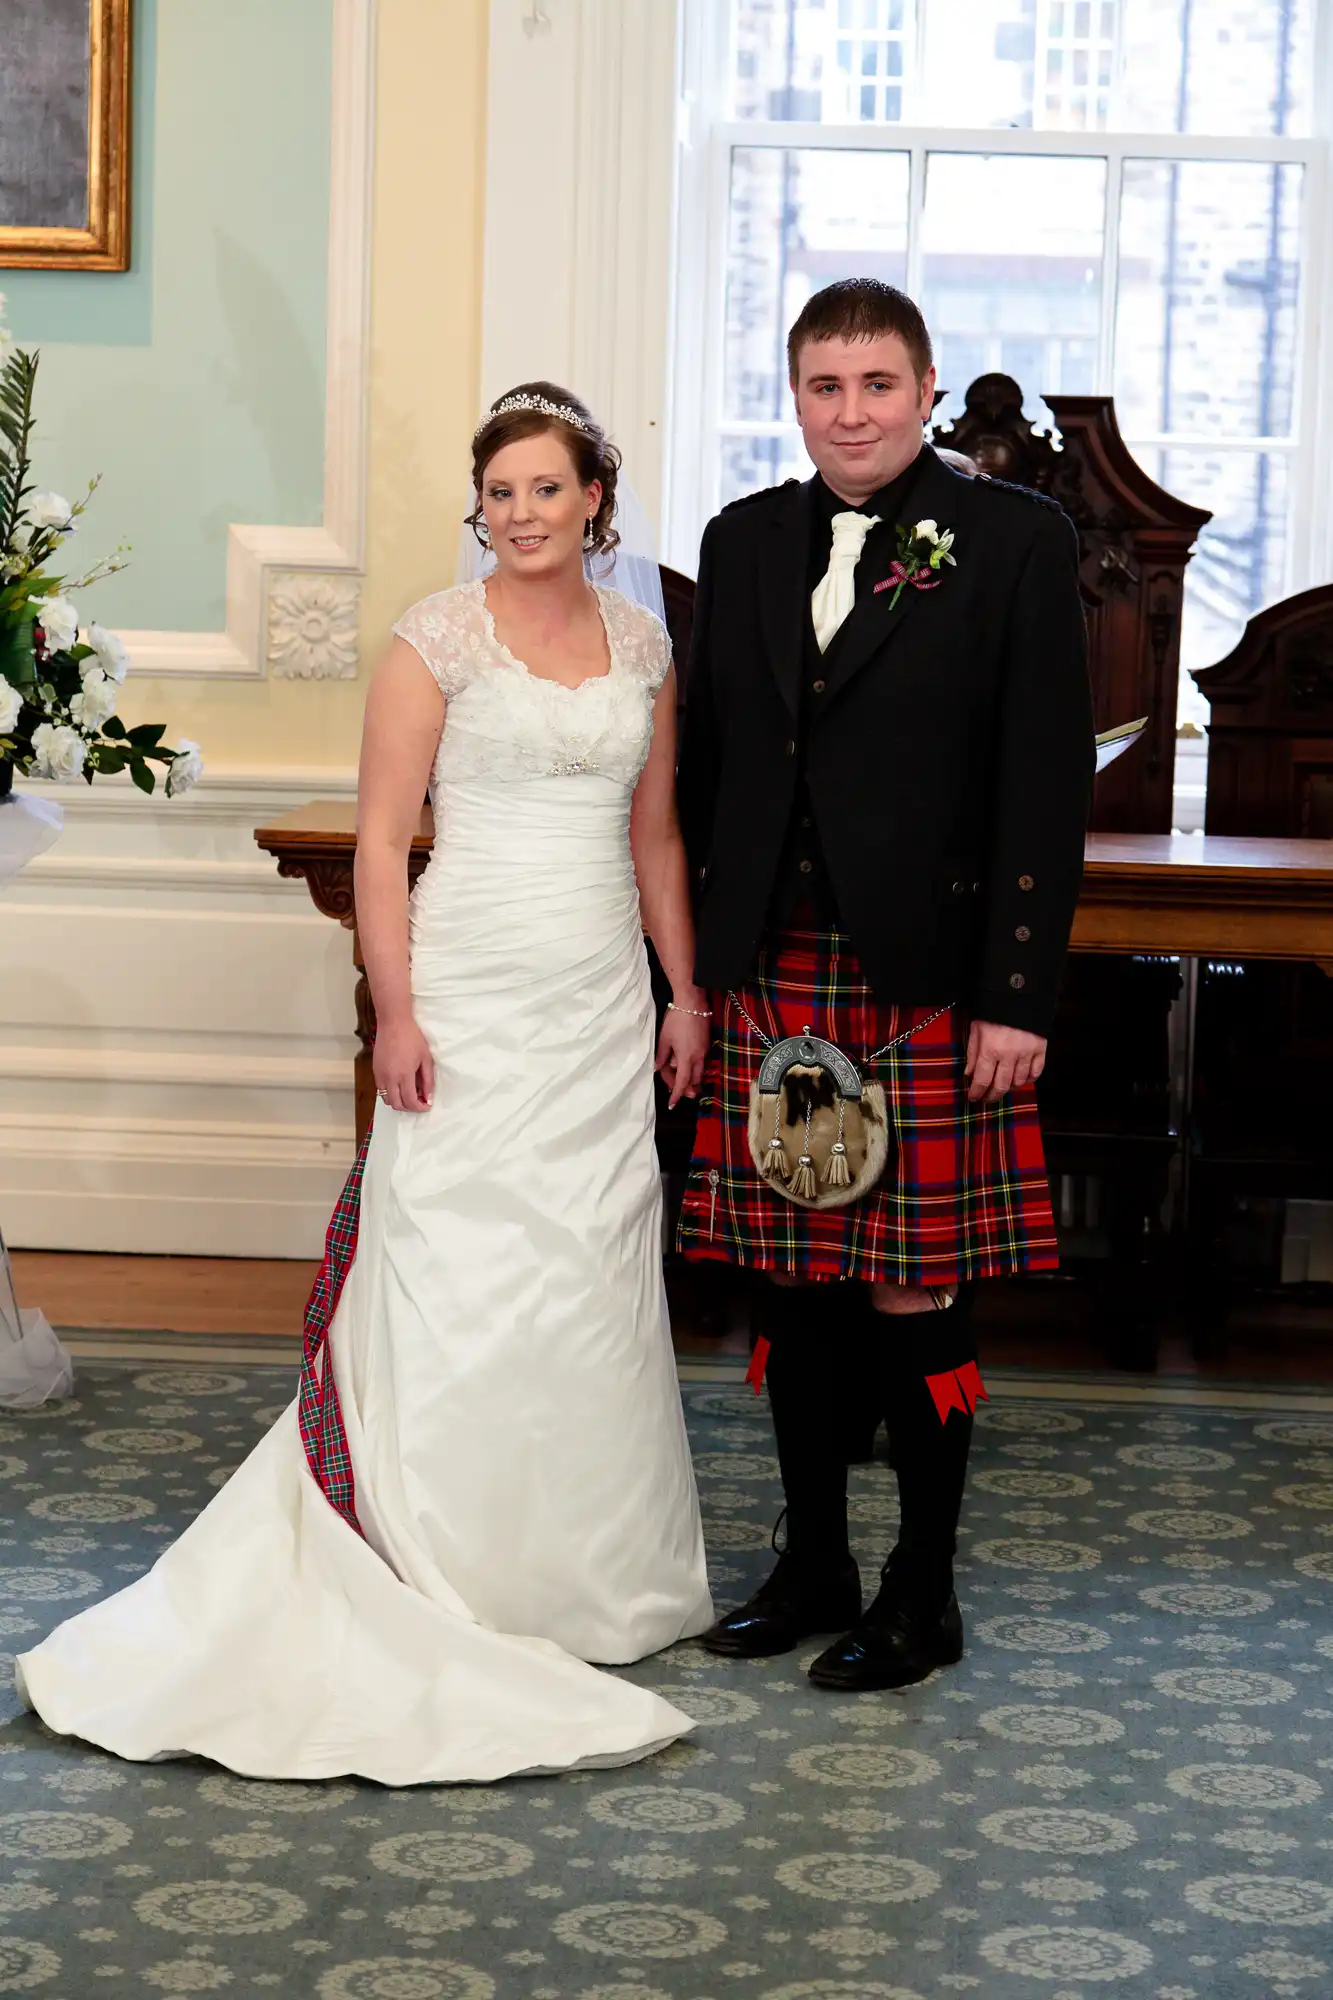 A bride in a white gown and a groom in a tartan kilt and sporran standing in a room with elegant decor.